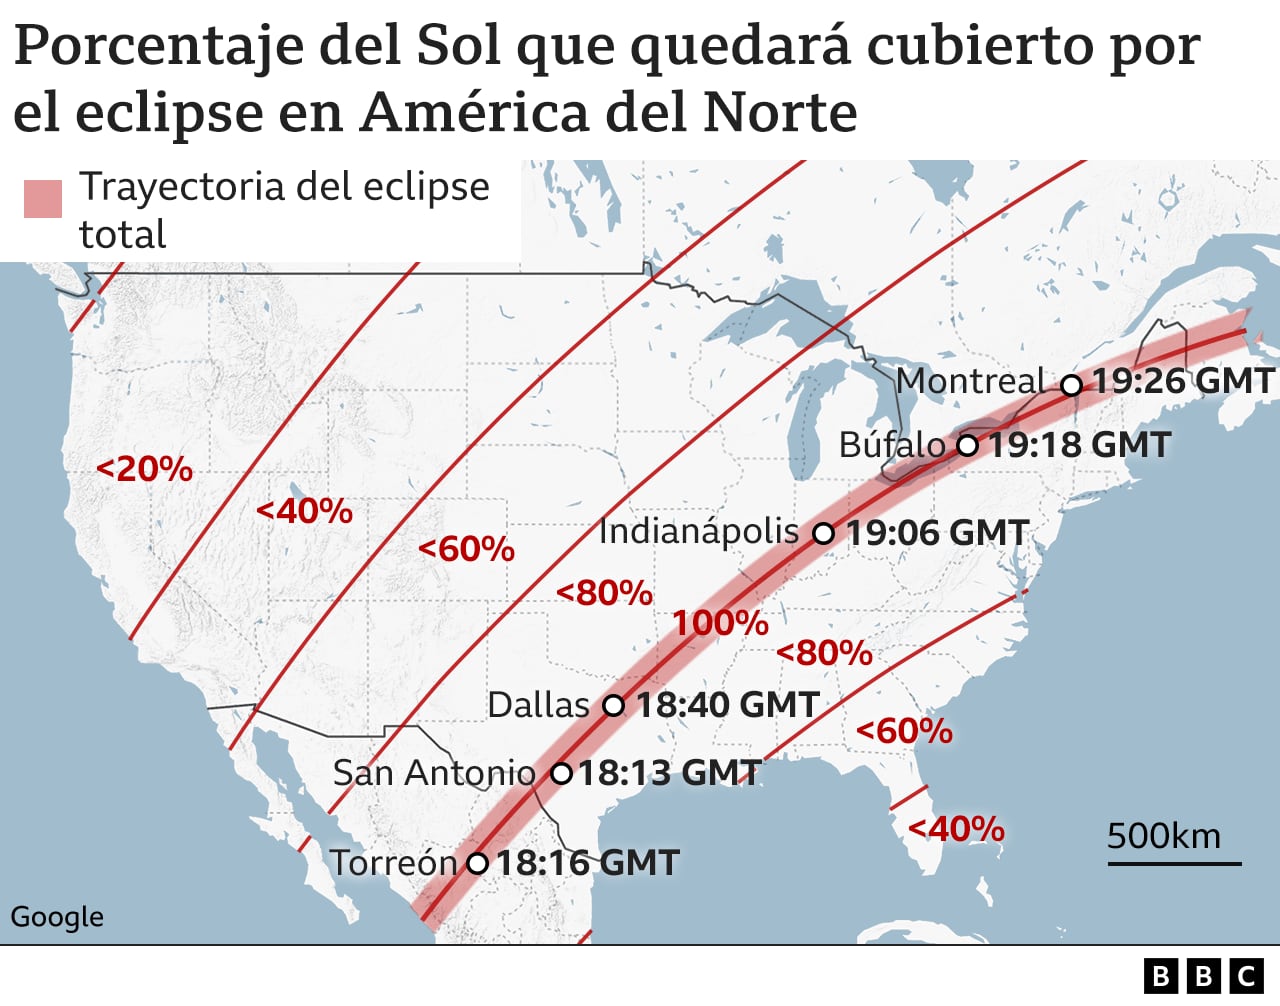 Percentage of the Sun that will be covered by the eclipse in North America